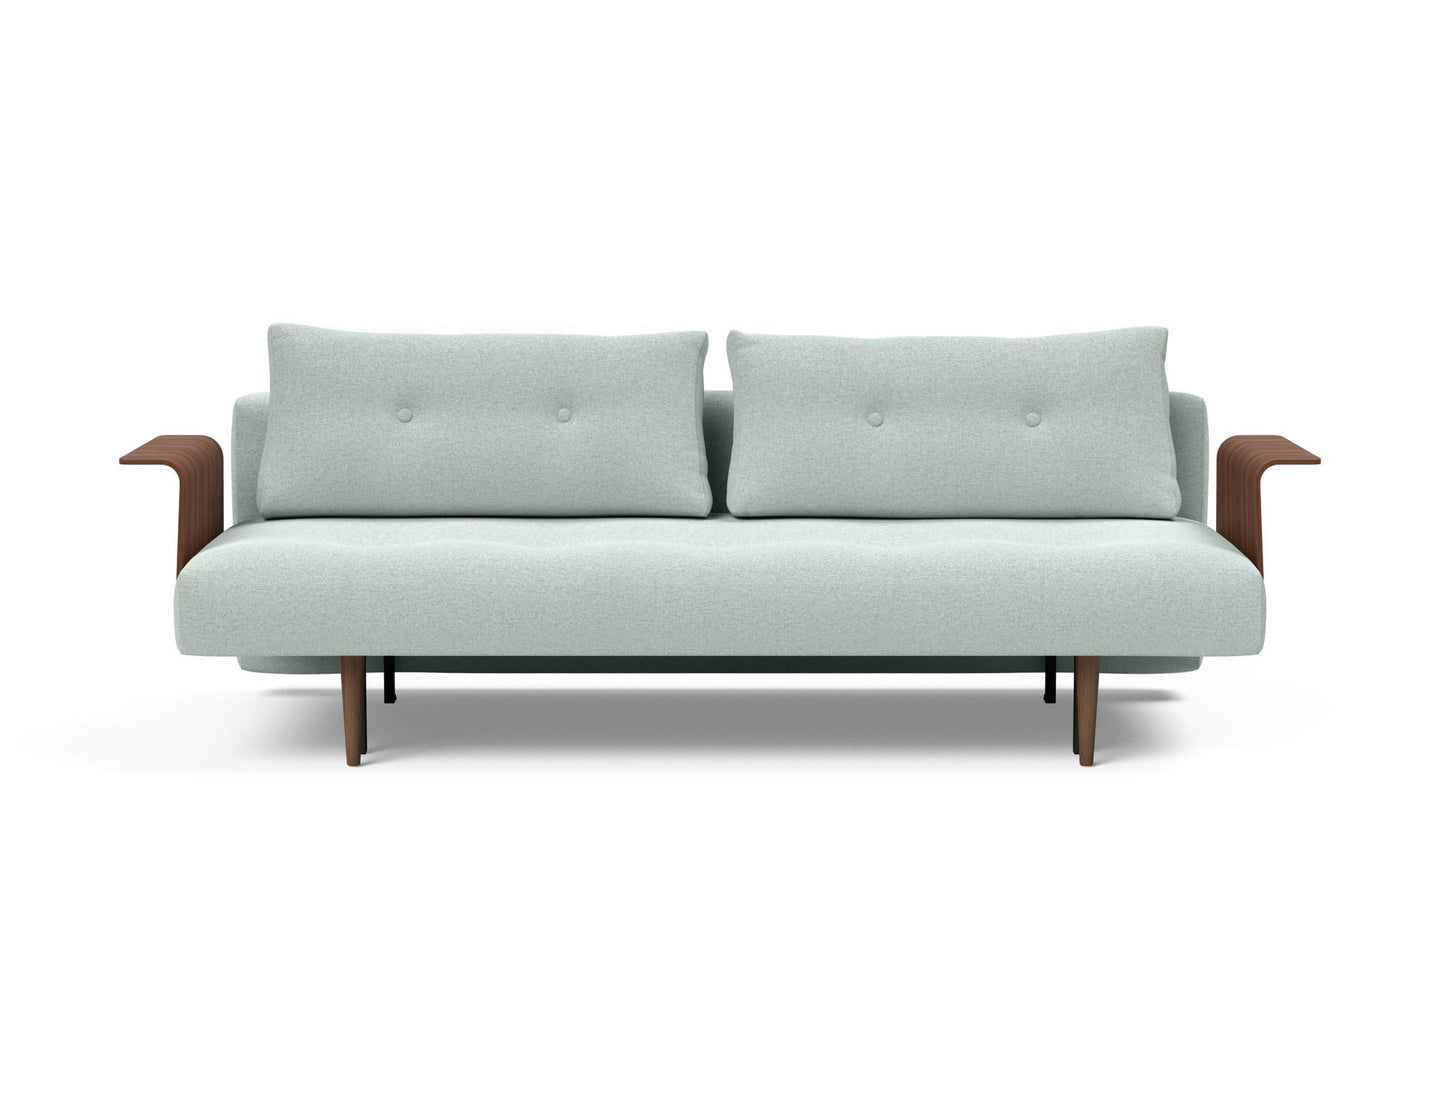 Recast Plus Sofa Bed Dark Styletto With Arms 552